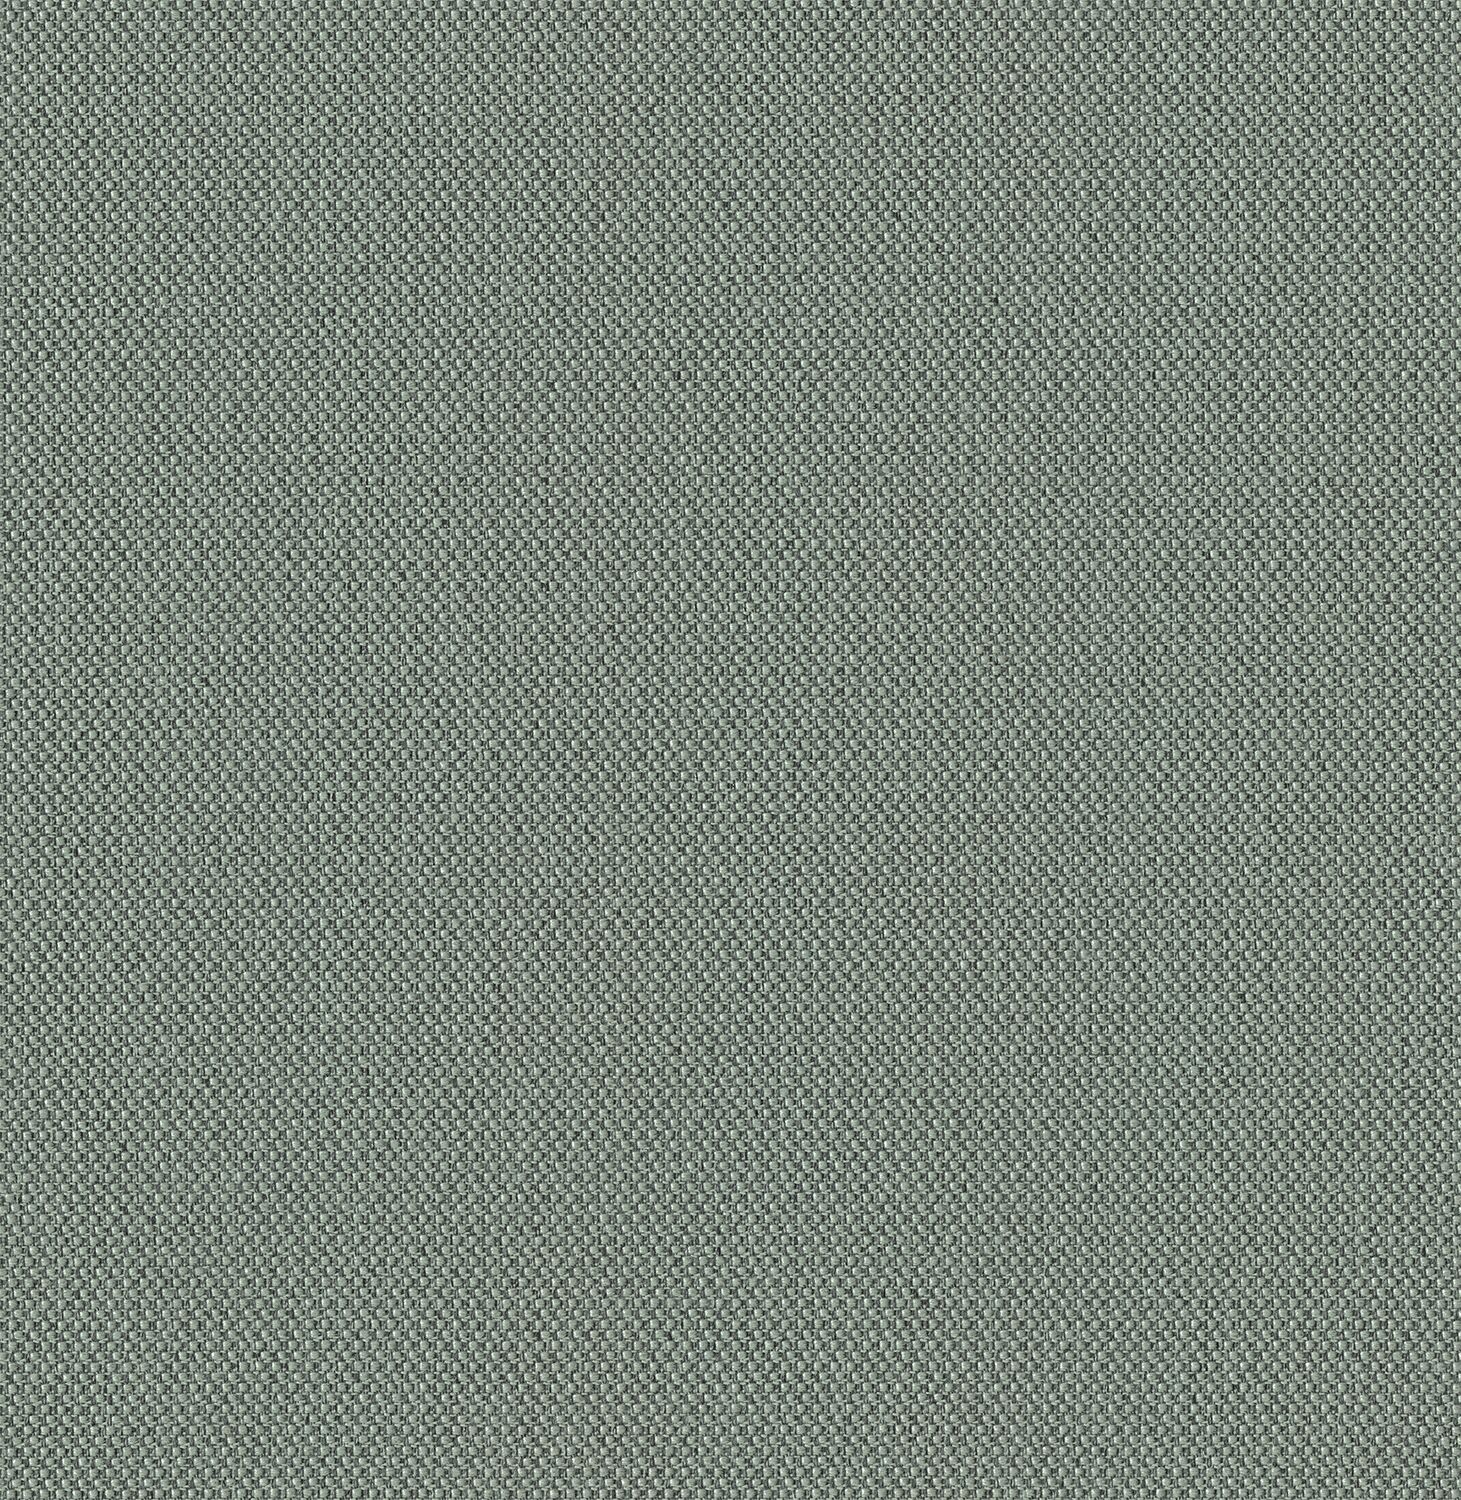 Biotope - Sea Froth - 4113 - 14 Tileable Swatches